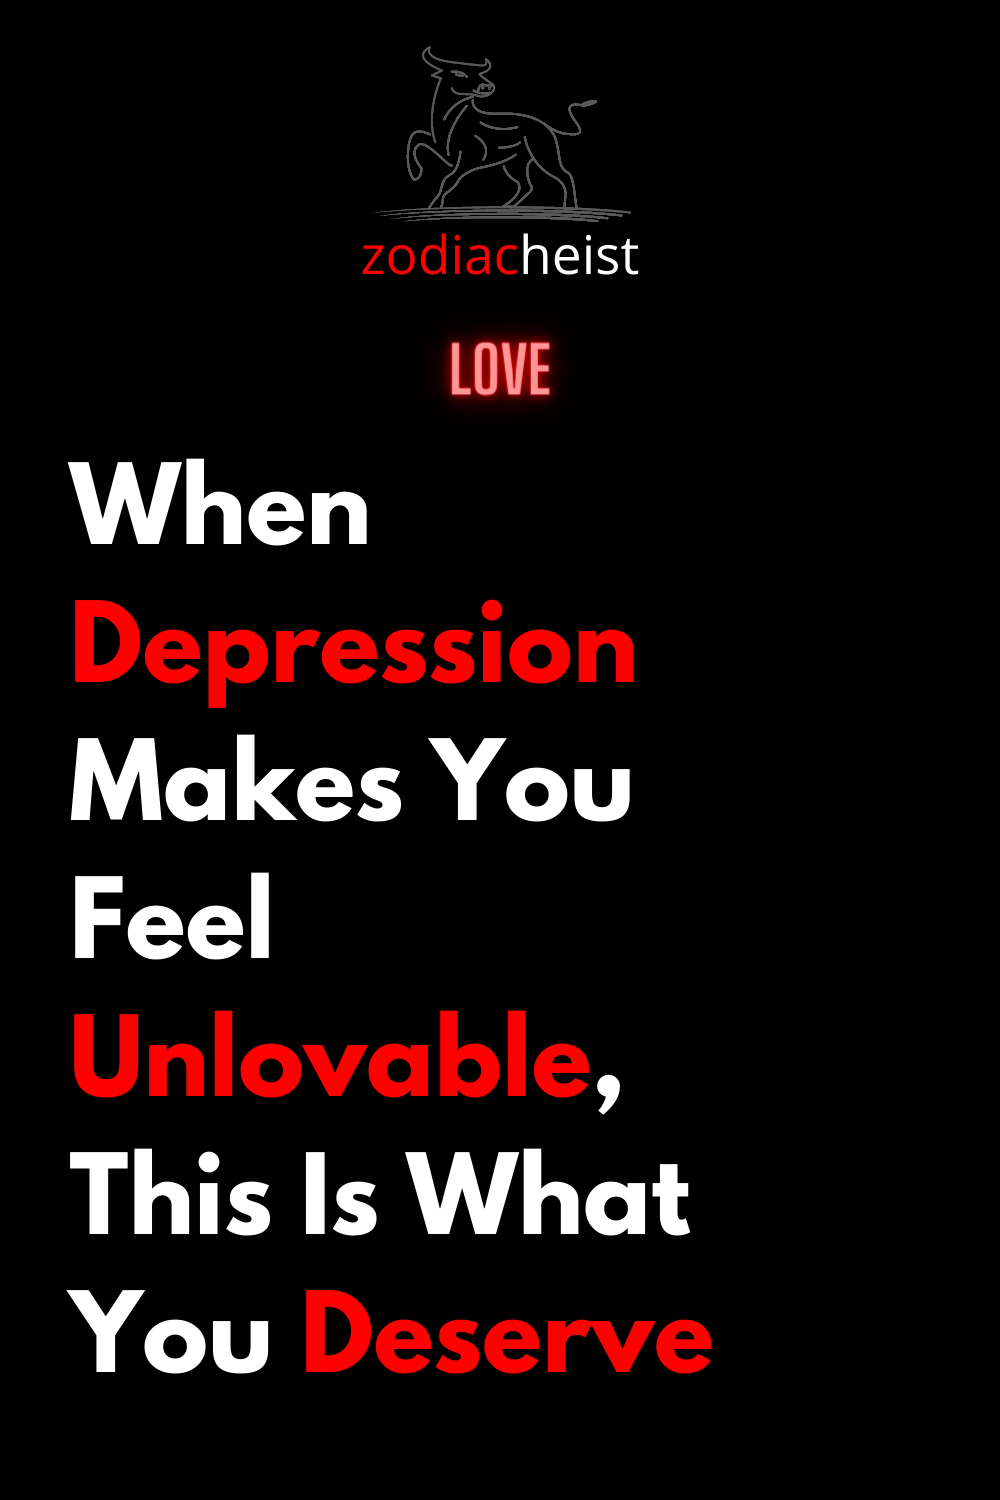 When Depression Makes You Feel Unlovable, This Is What You Deserve